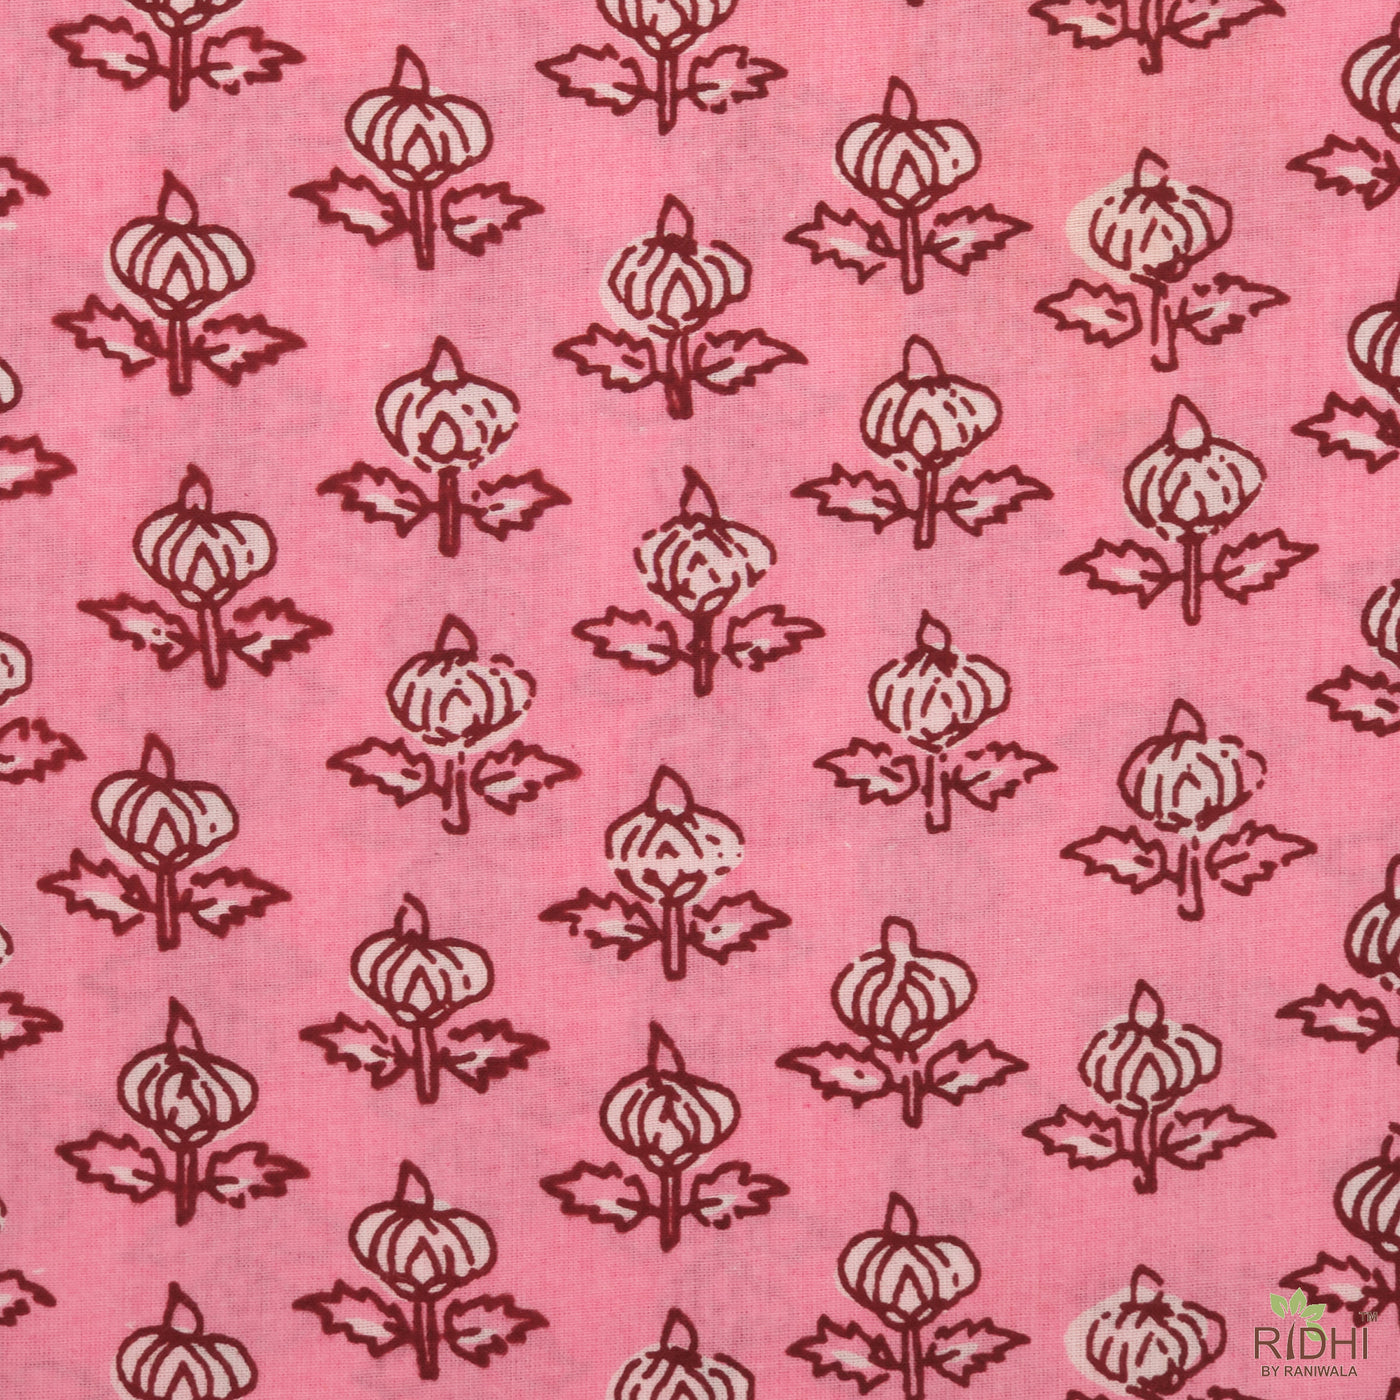 Watermelon Pink, Current Red Indian Floral Printed Cotton Cloth, Fabric by the yard, Curtains Pillows Cushions Bags Chair Covers Quilt Dress